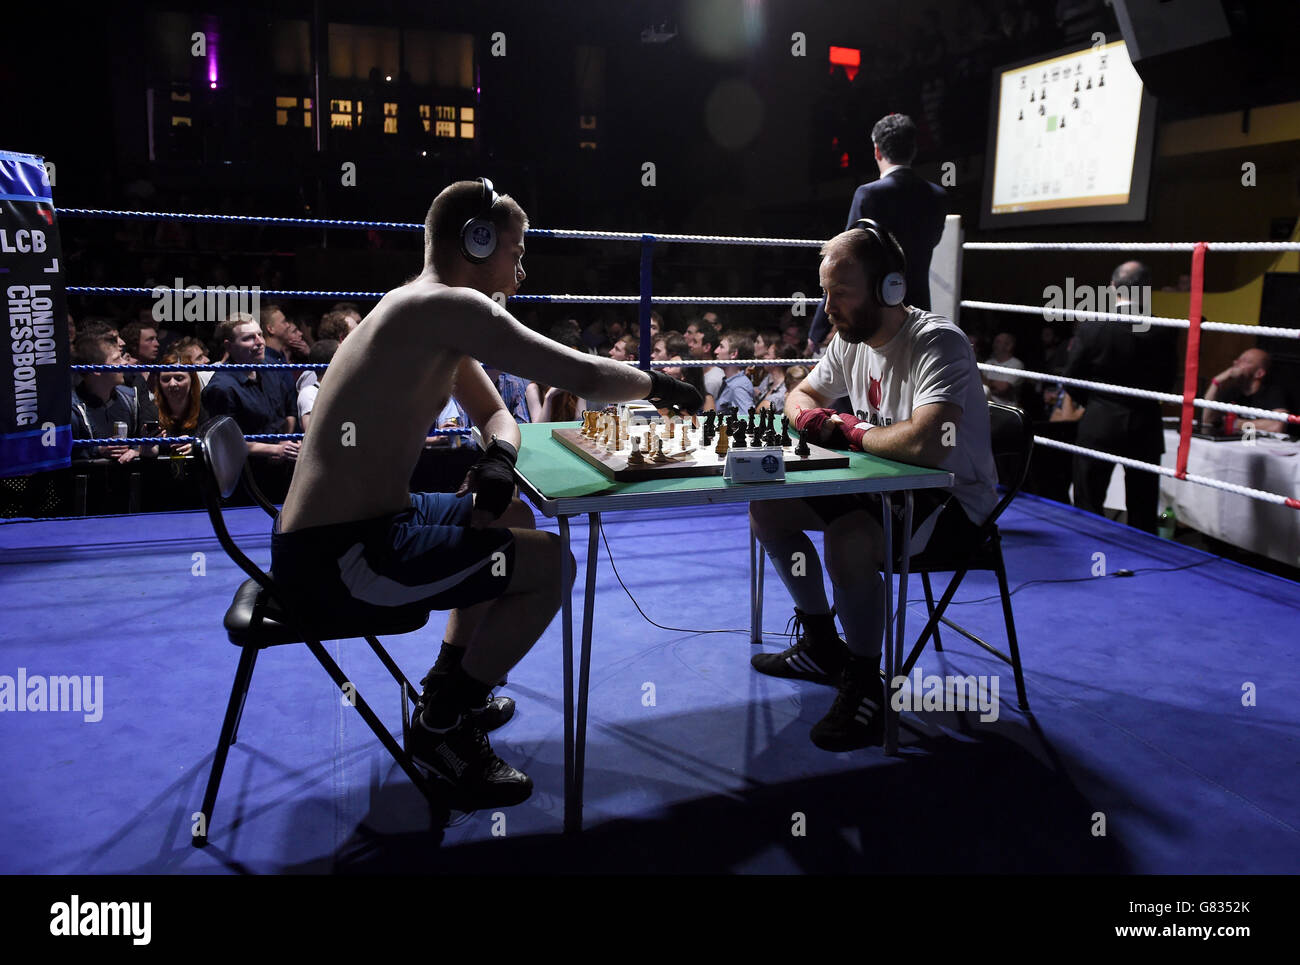 Max Williams (left) and Steve Philp compete in a round of chess